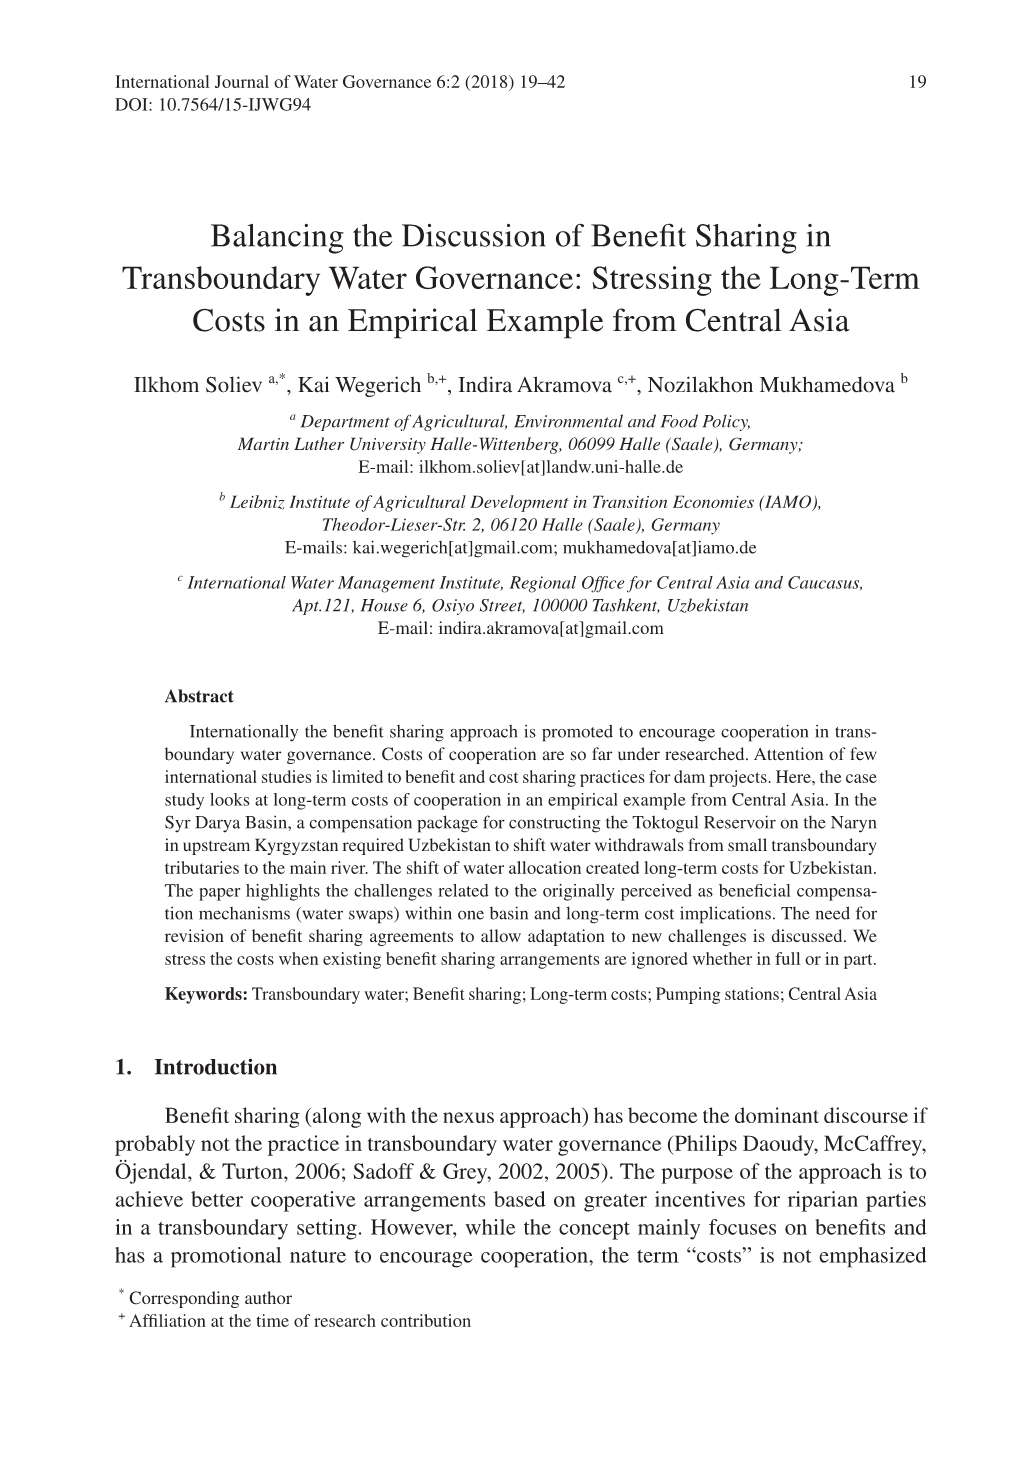 Balancing the Discussion of Benefit Sharing in Transboundary Water Governance: Stressing the Long-Term Costs in an Empirical Example from Central Asia